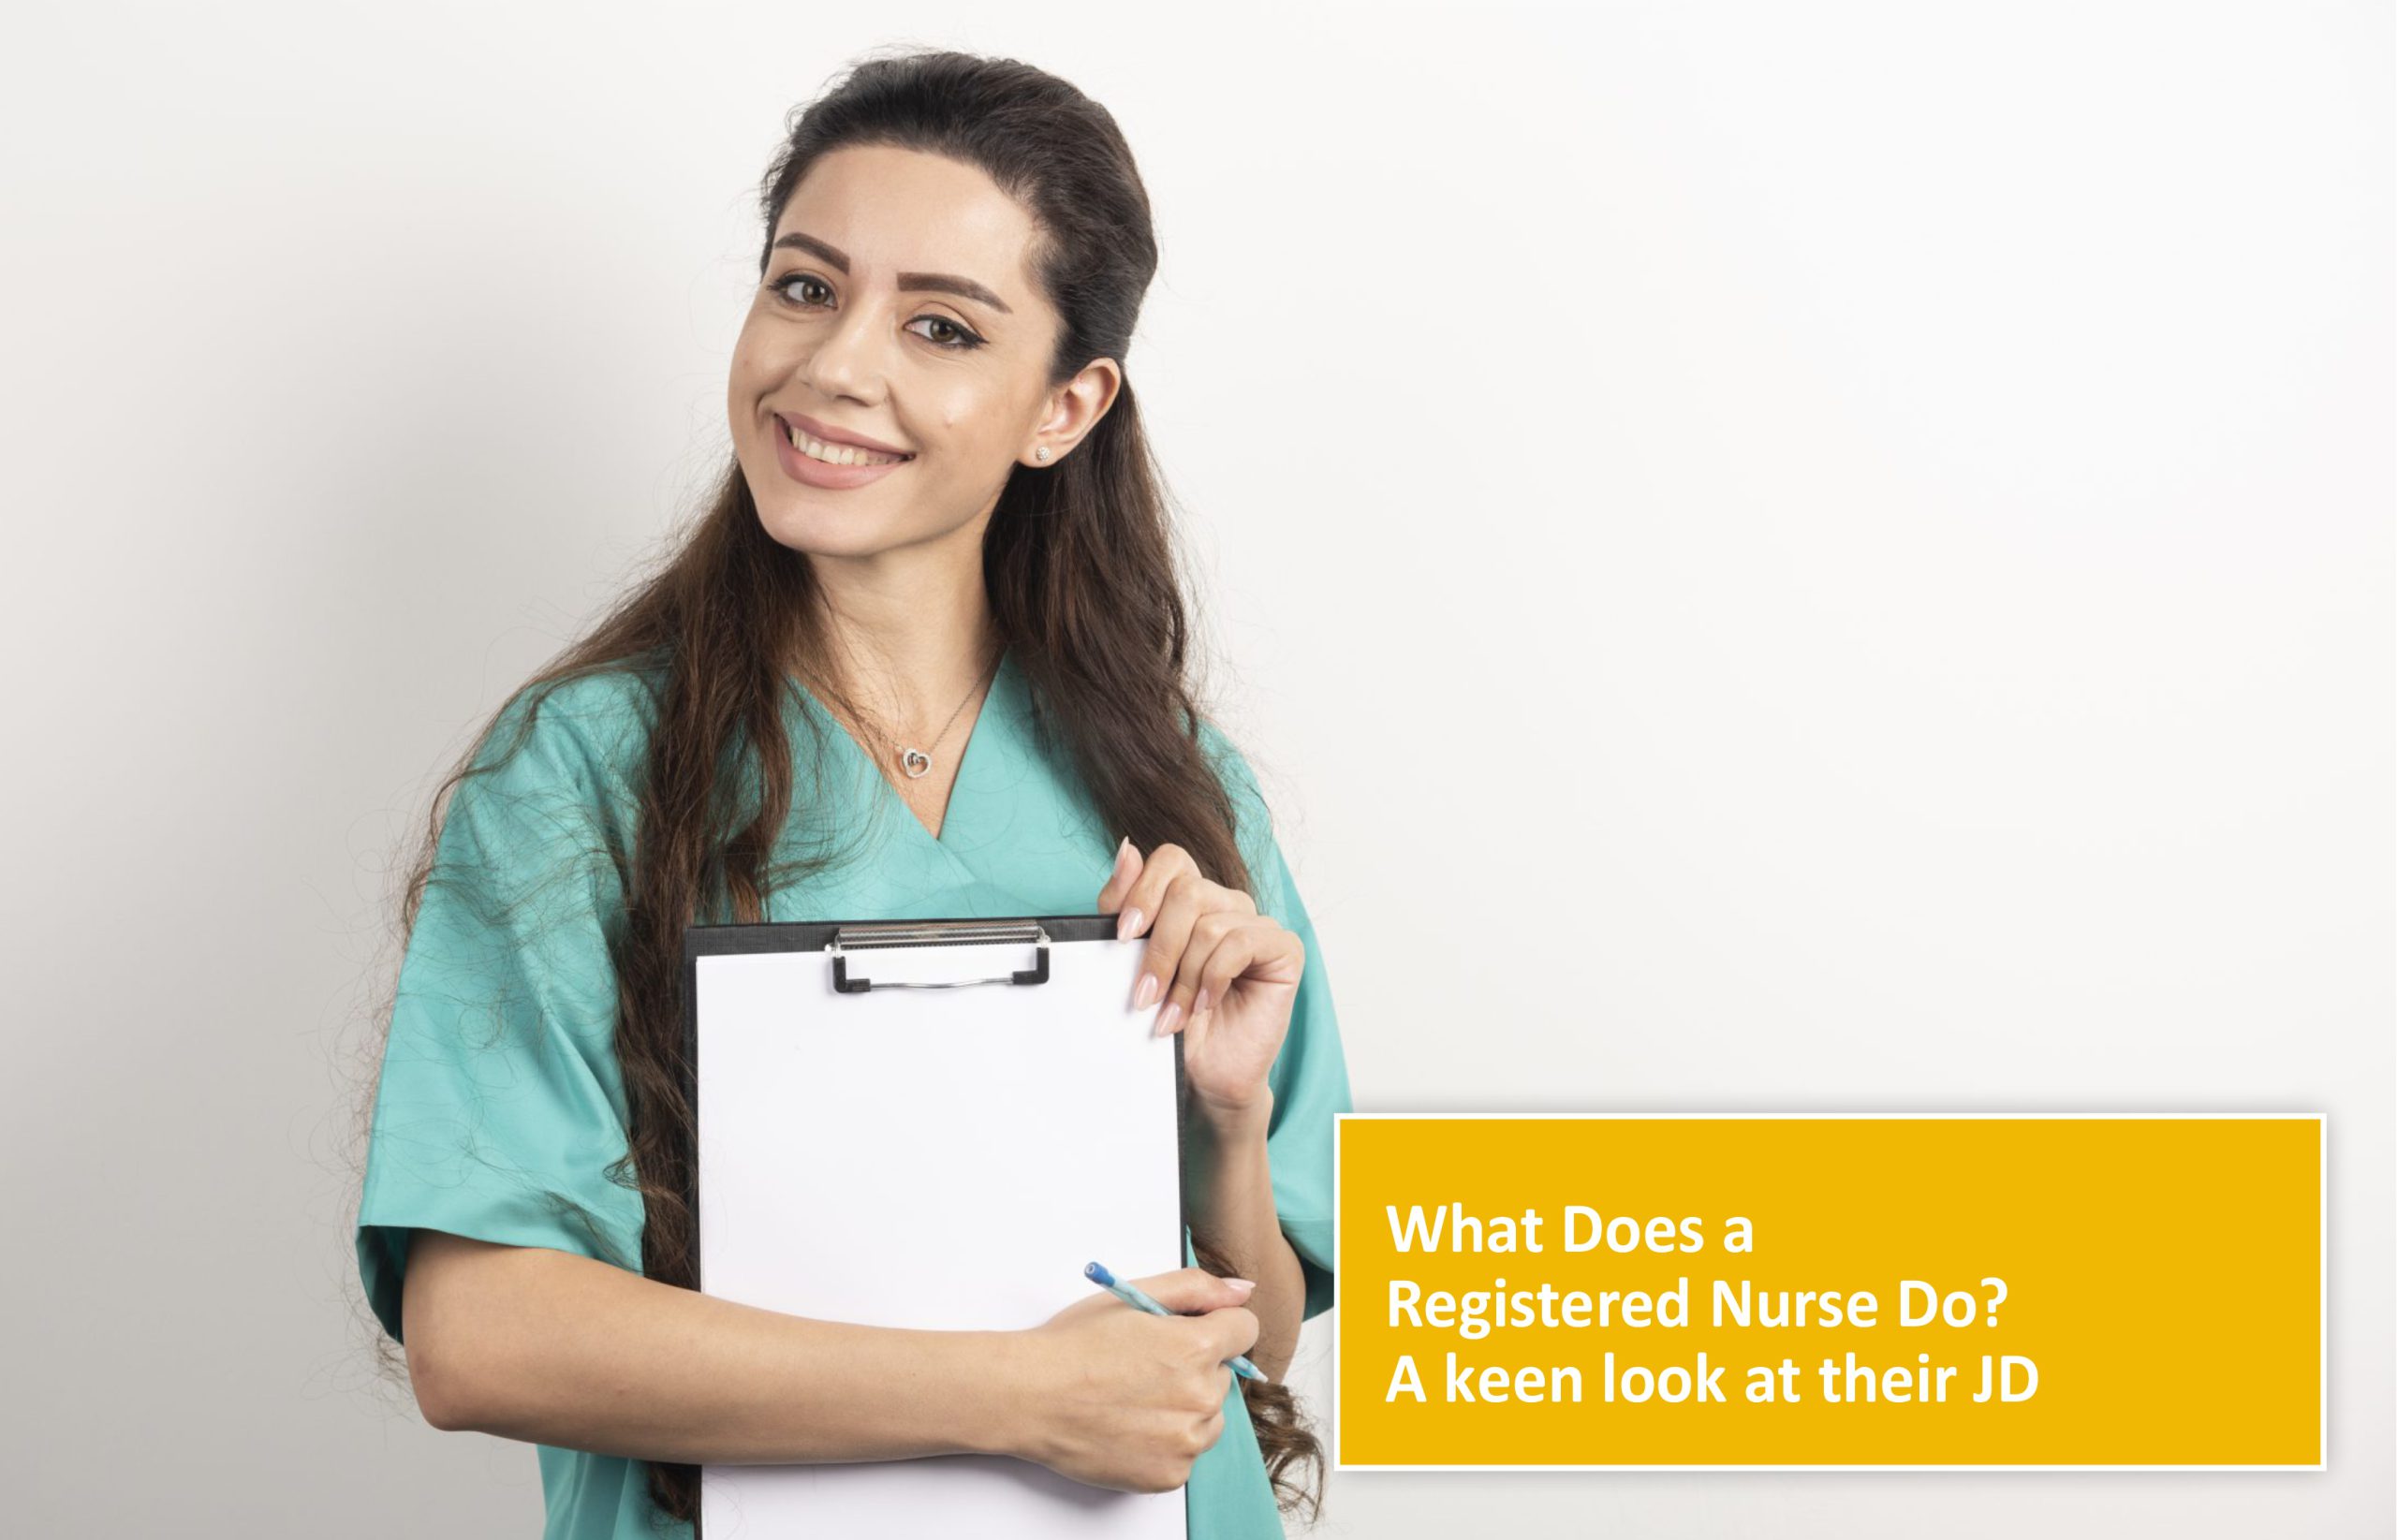 What does a Registered Nurse do? A keen look at their job description.